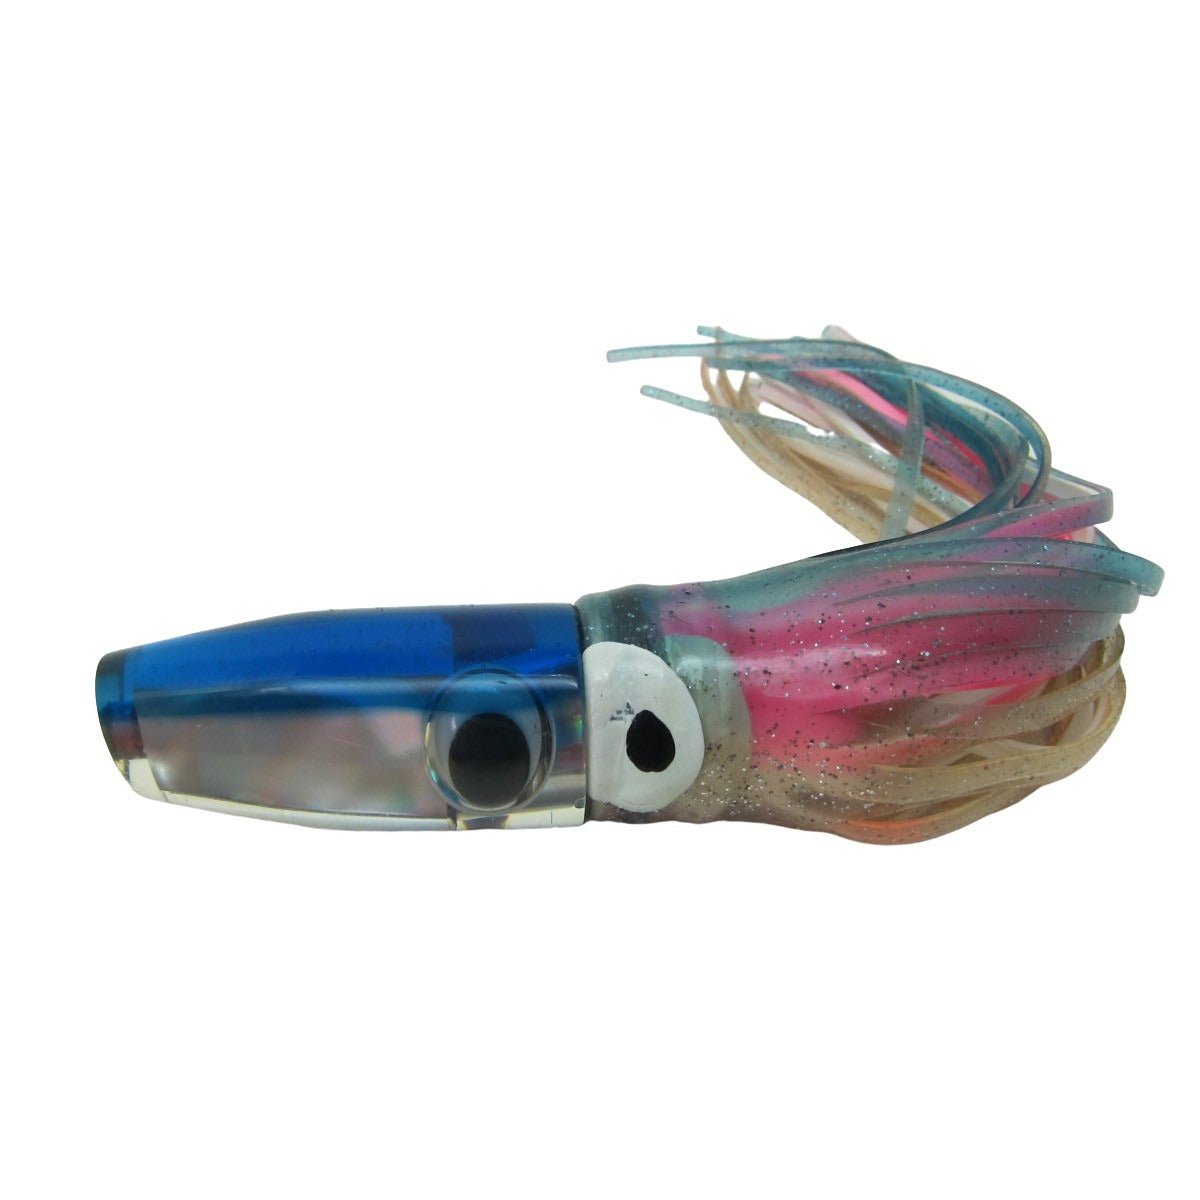 Marlin Magic Lures -In Stock Now. Shop all New and Used Saltwater